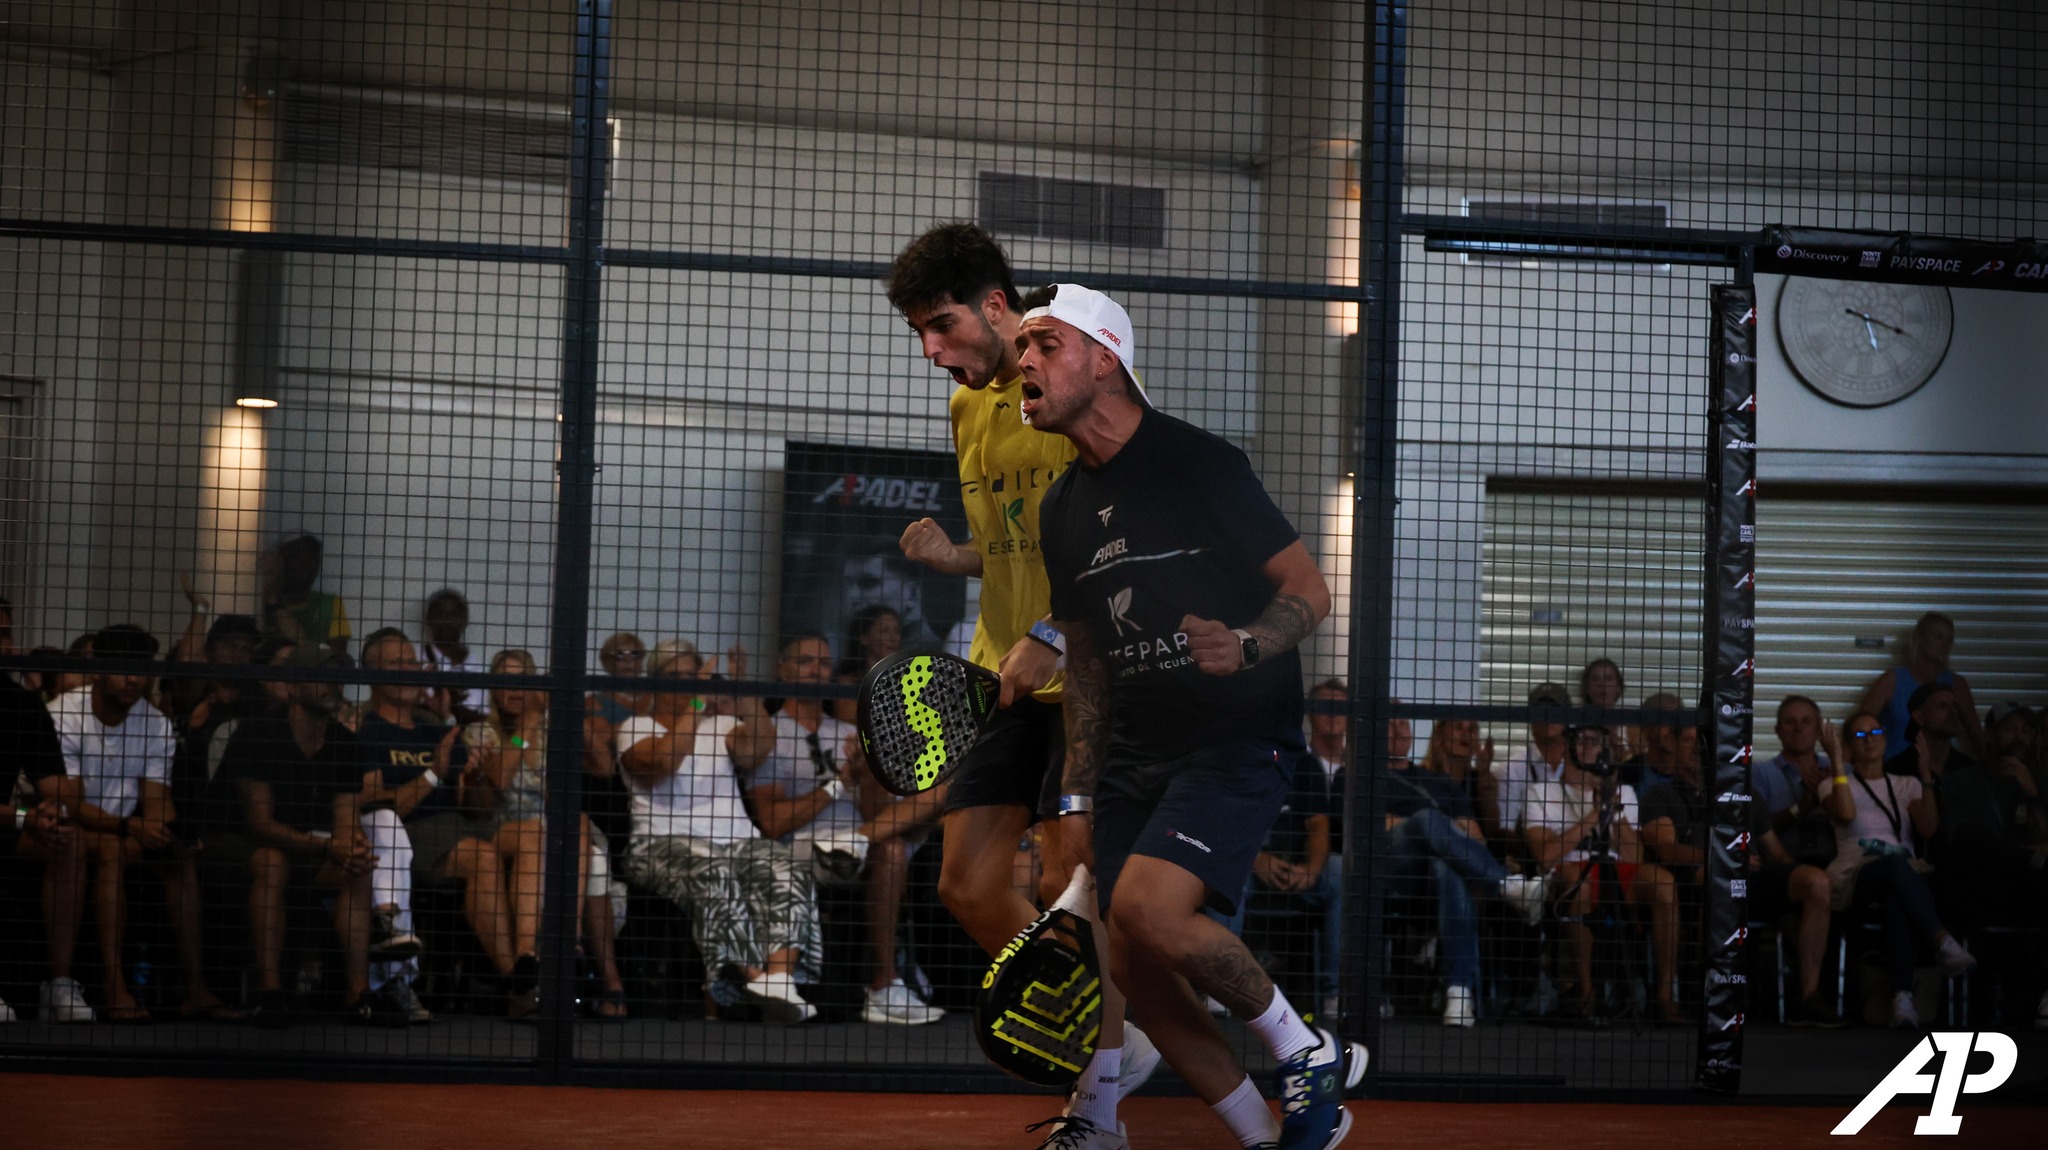 A1 Padel Kapstadt-Meister: Alfonso und De Pascual in Bully!